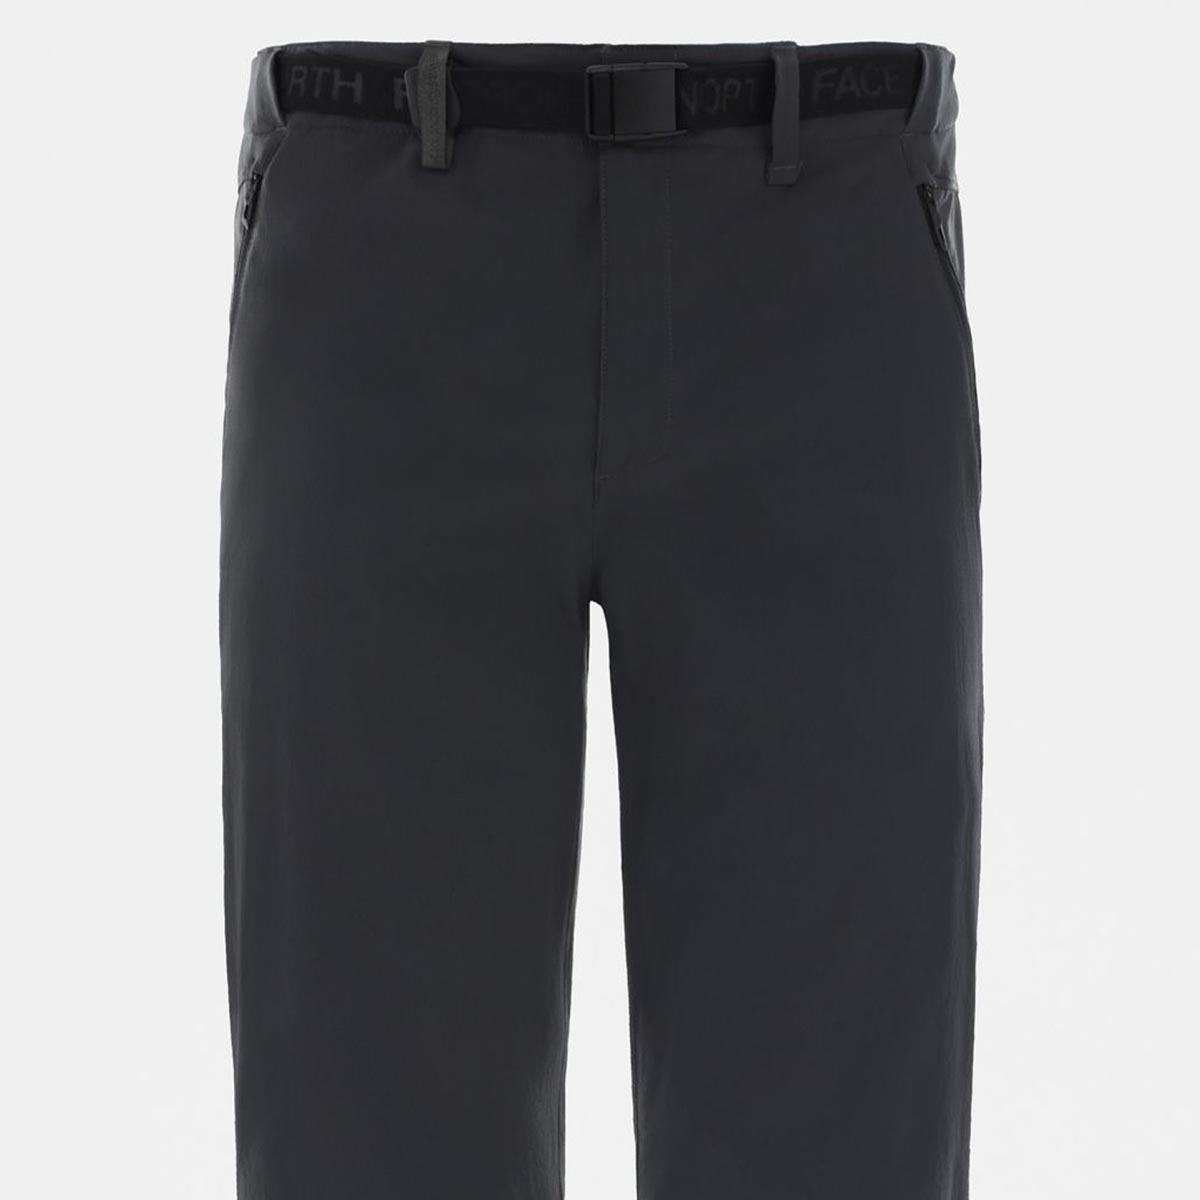 THE NORTH FACE - SPEEDLIGHT II TROUSERS